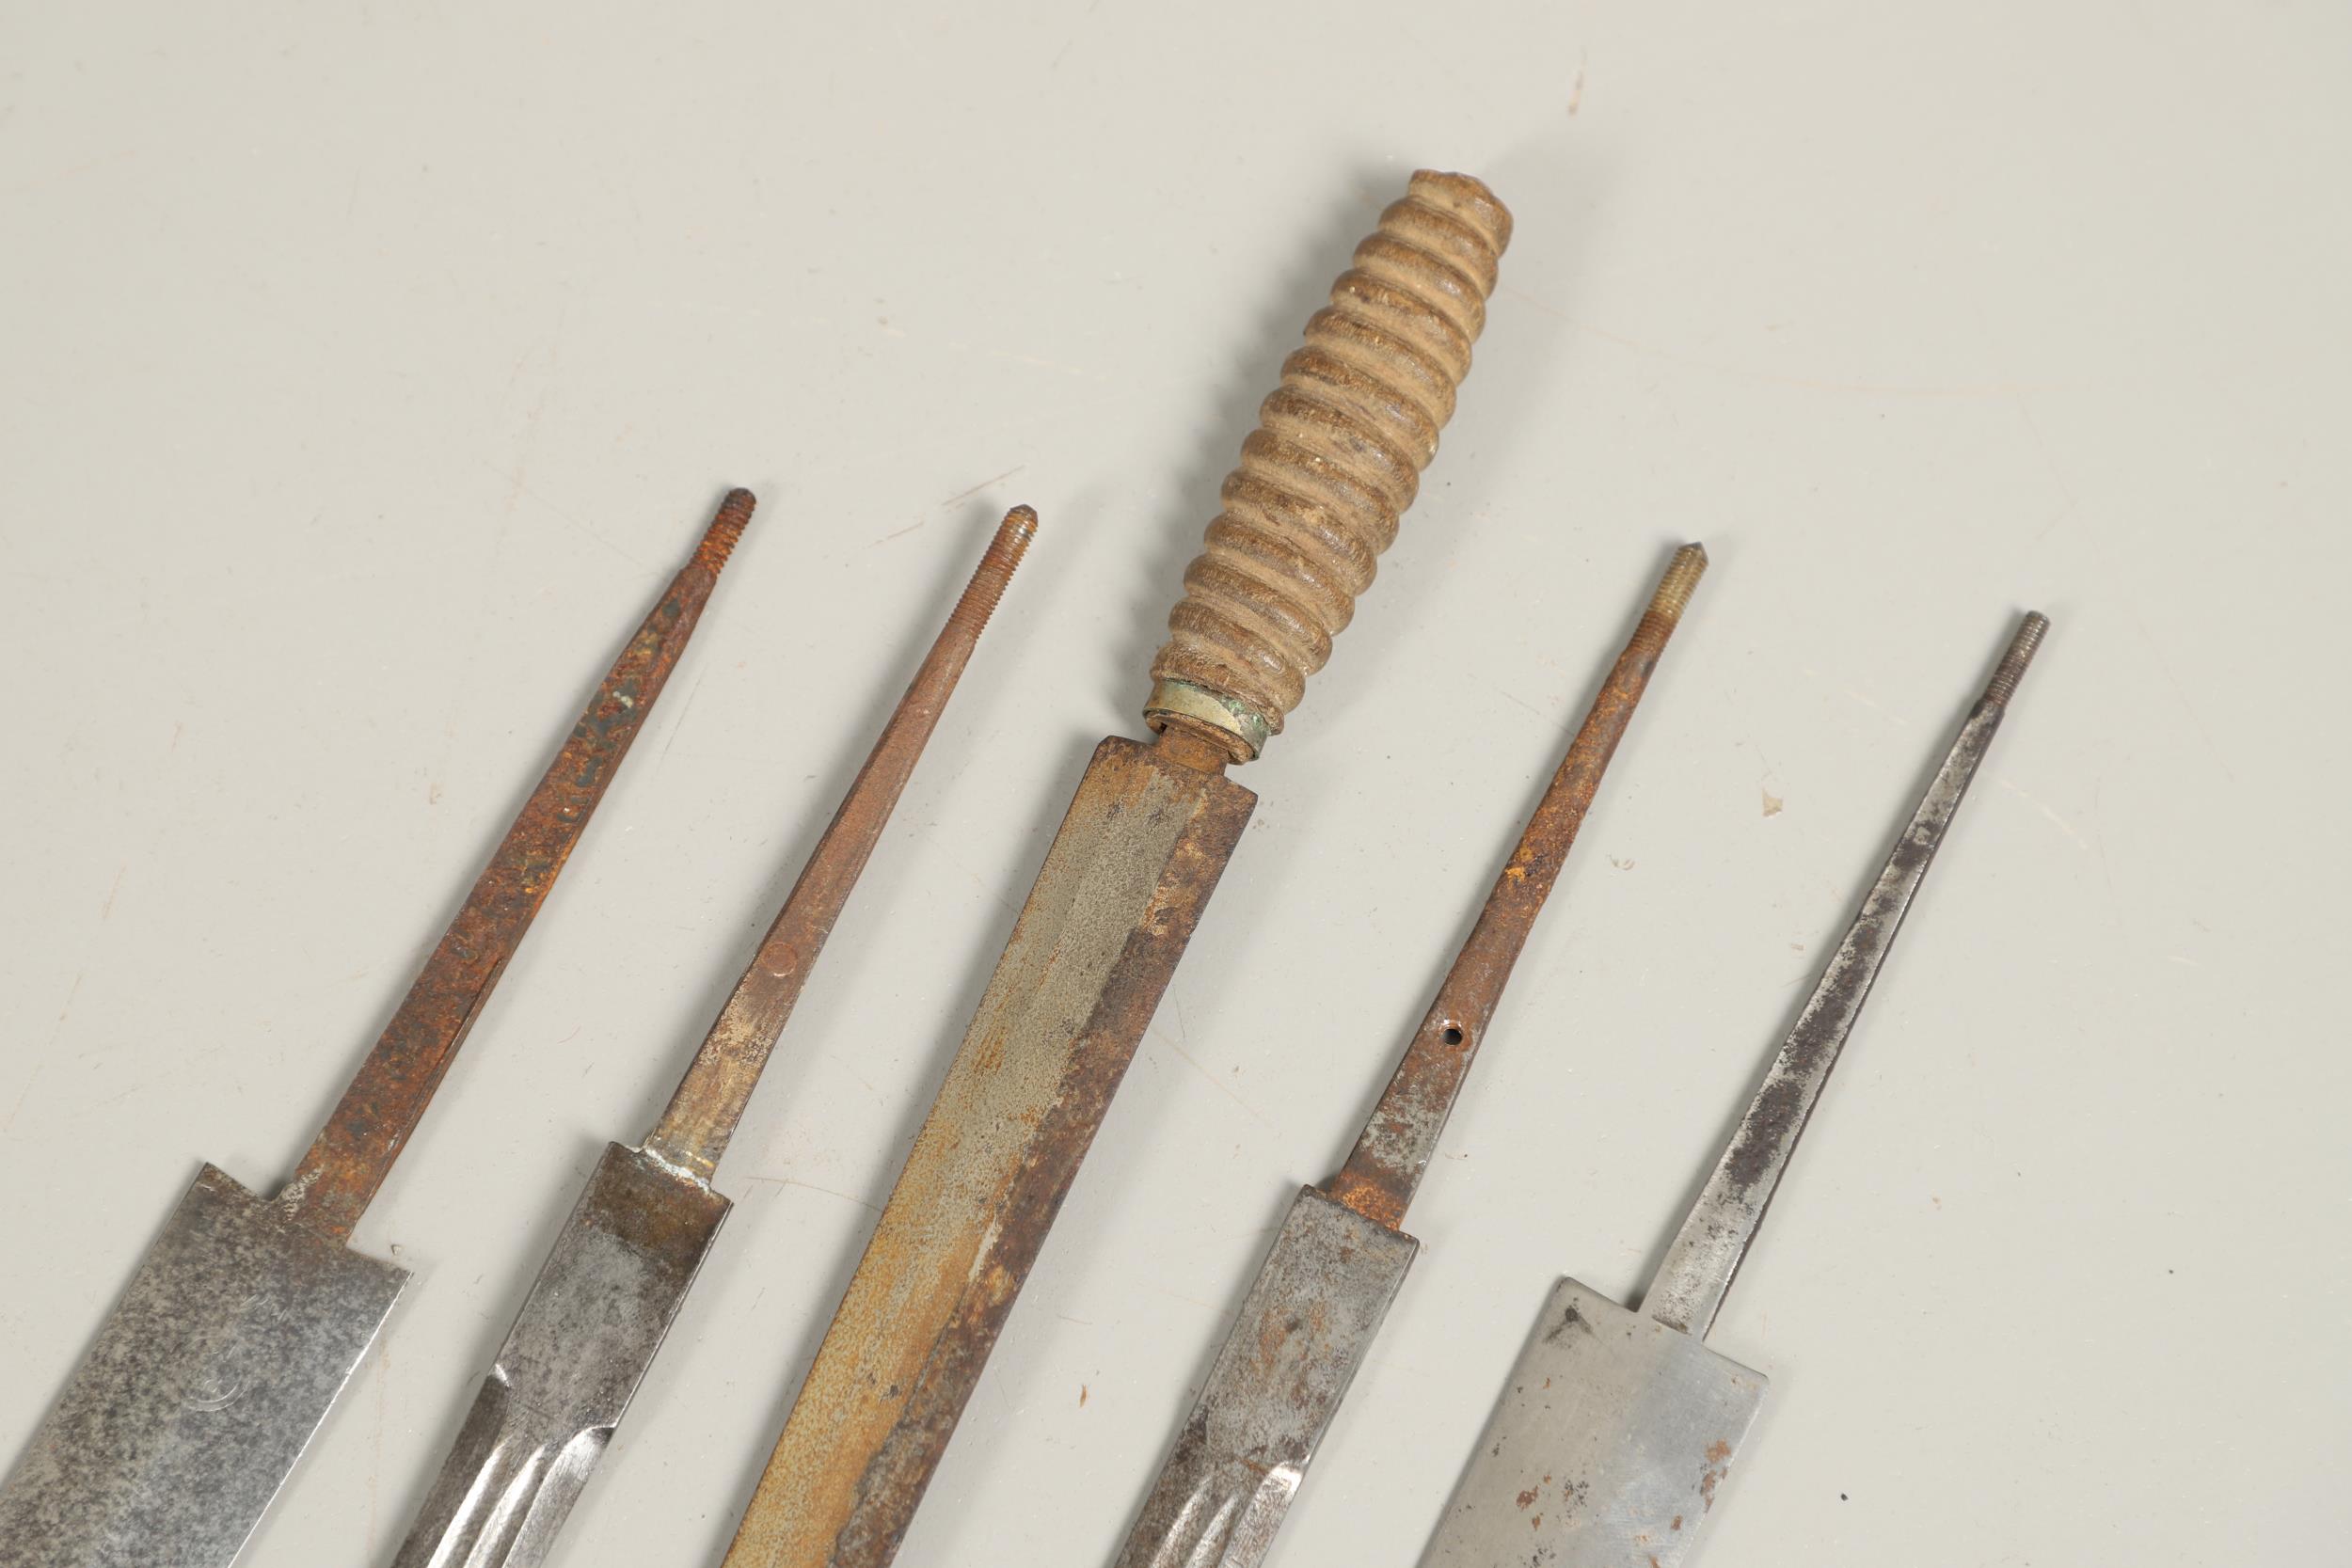 AN INTERESTING COLLECTION OF FIVE SECOND WORLD WAR GERMAN DAGGER BLADES. - Image 5 of 16